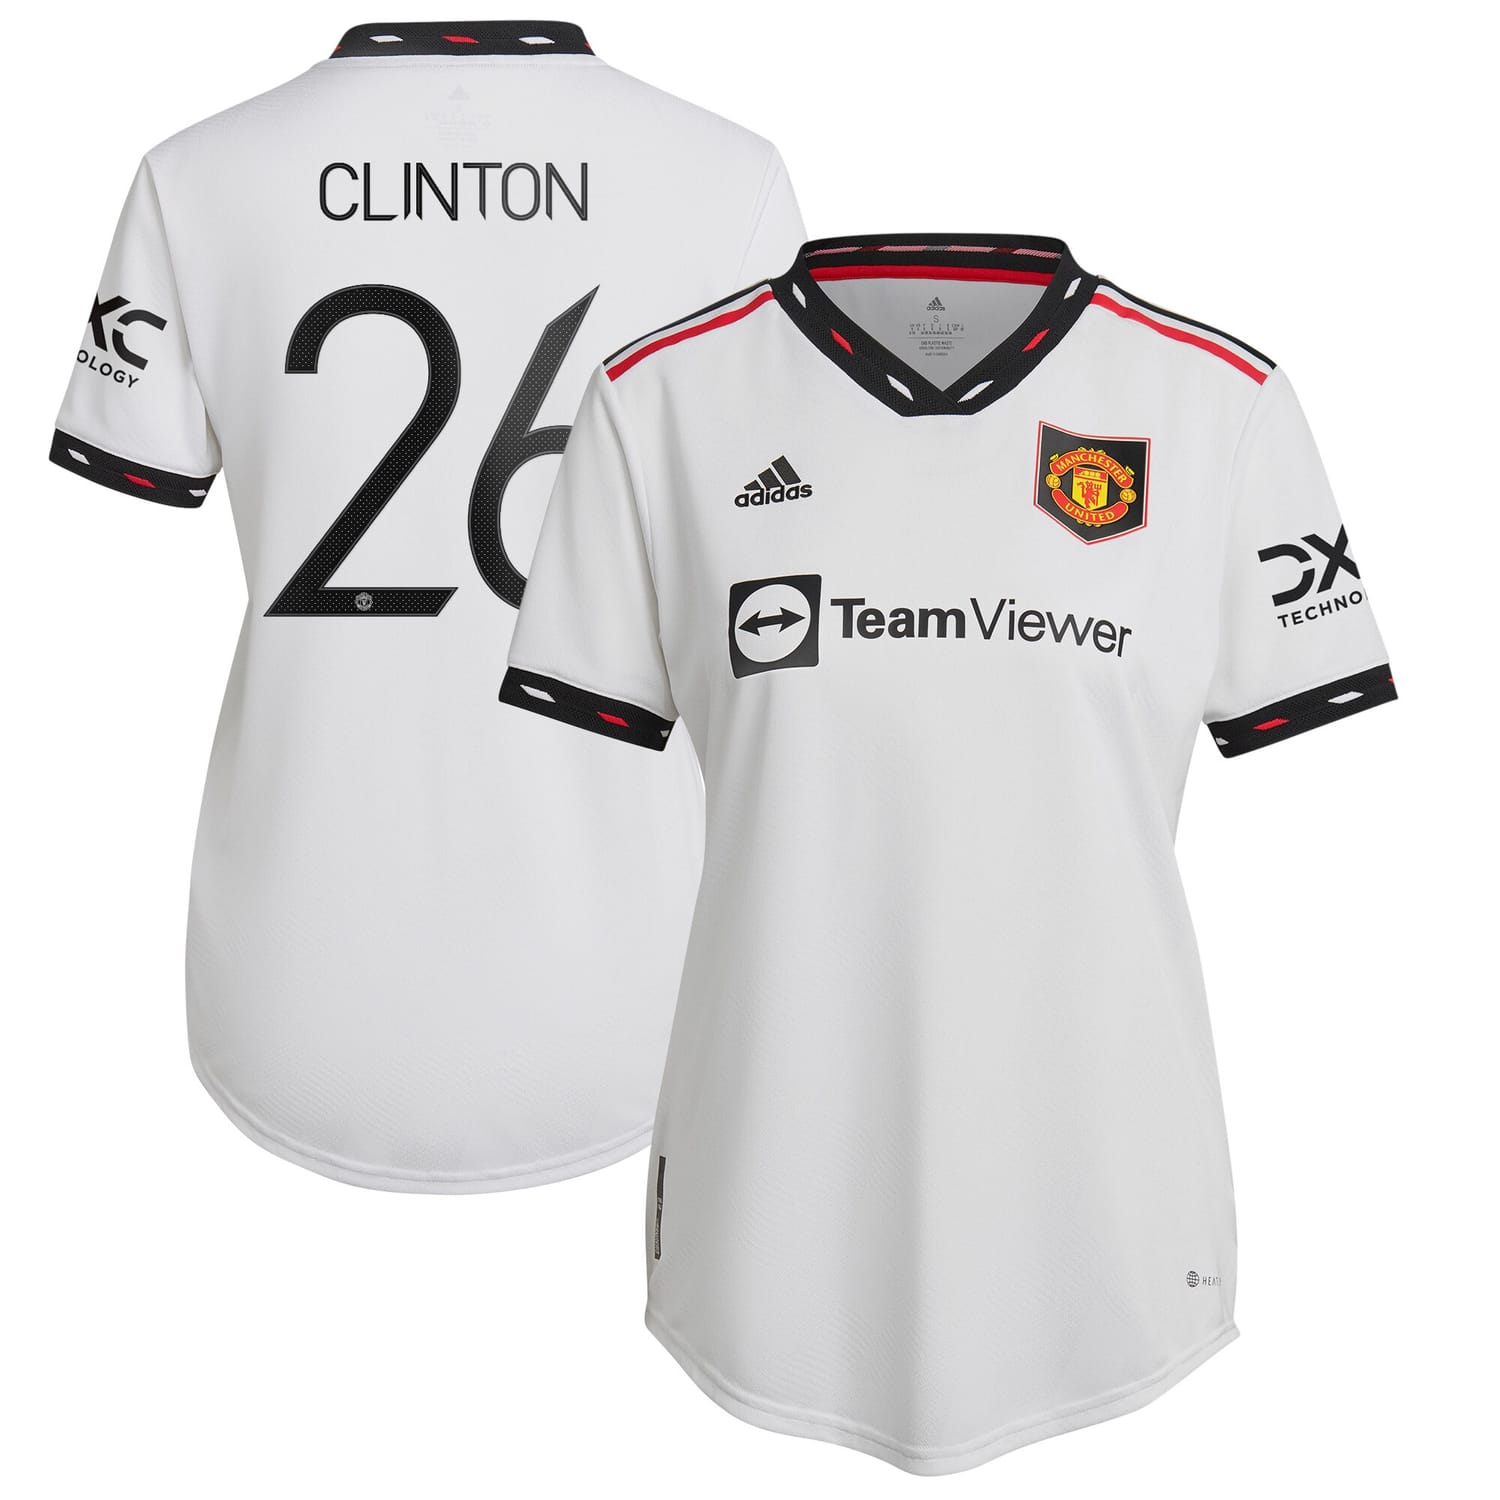 Premier League Manchester United Away Cup Authentic Jersey Shirt 2022-23 player Grace Clinton 26 printing for Women